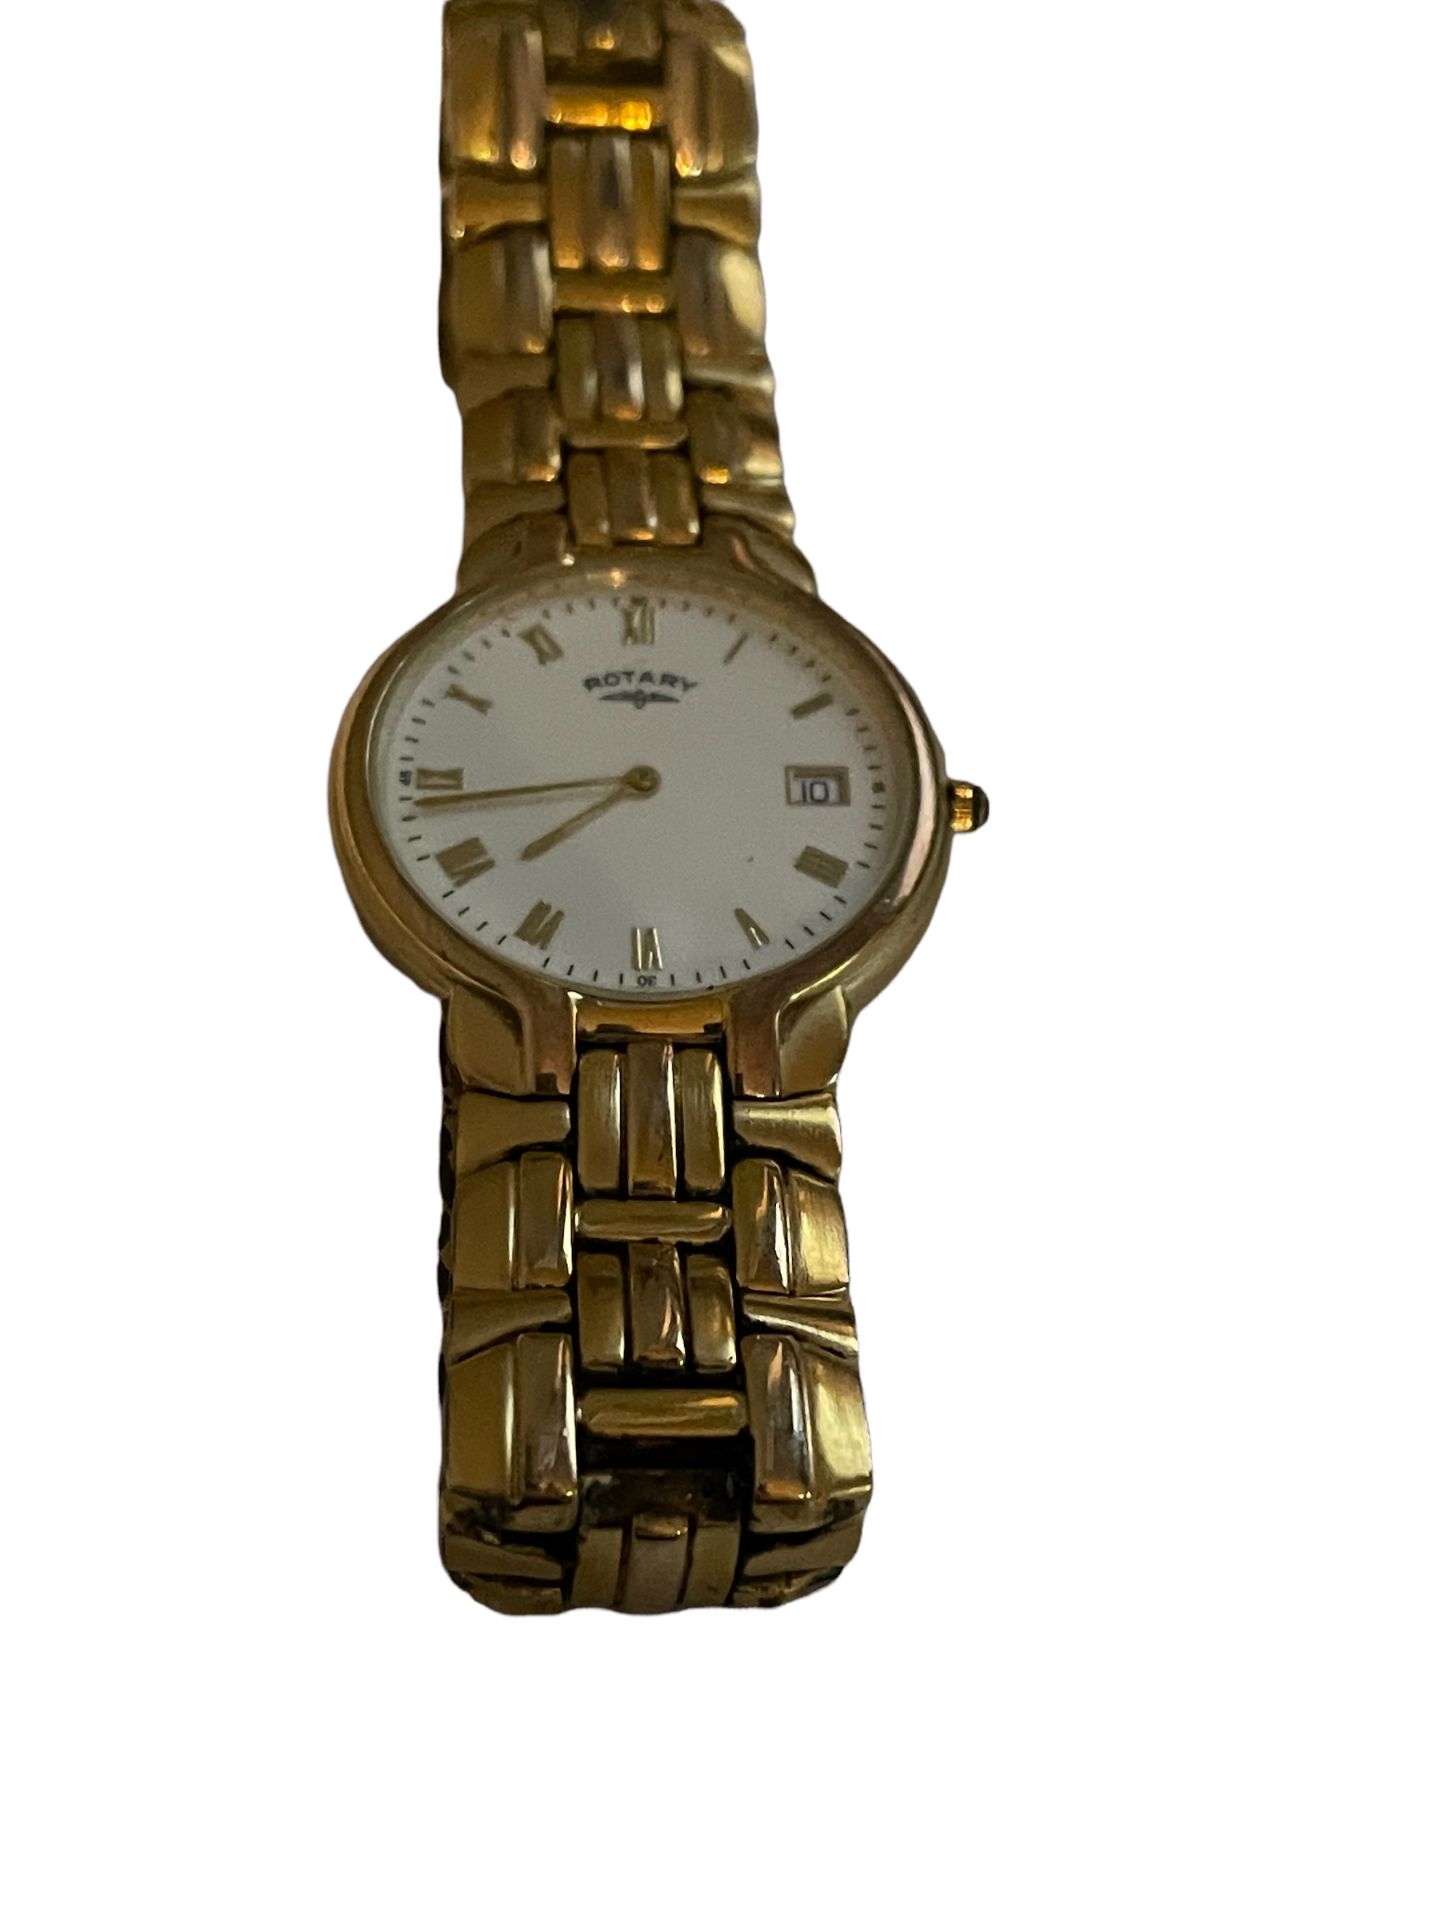 Mens Rotary Gold Plated Watch - Return Stock from our Private Jet Charter - Image 2 of 14